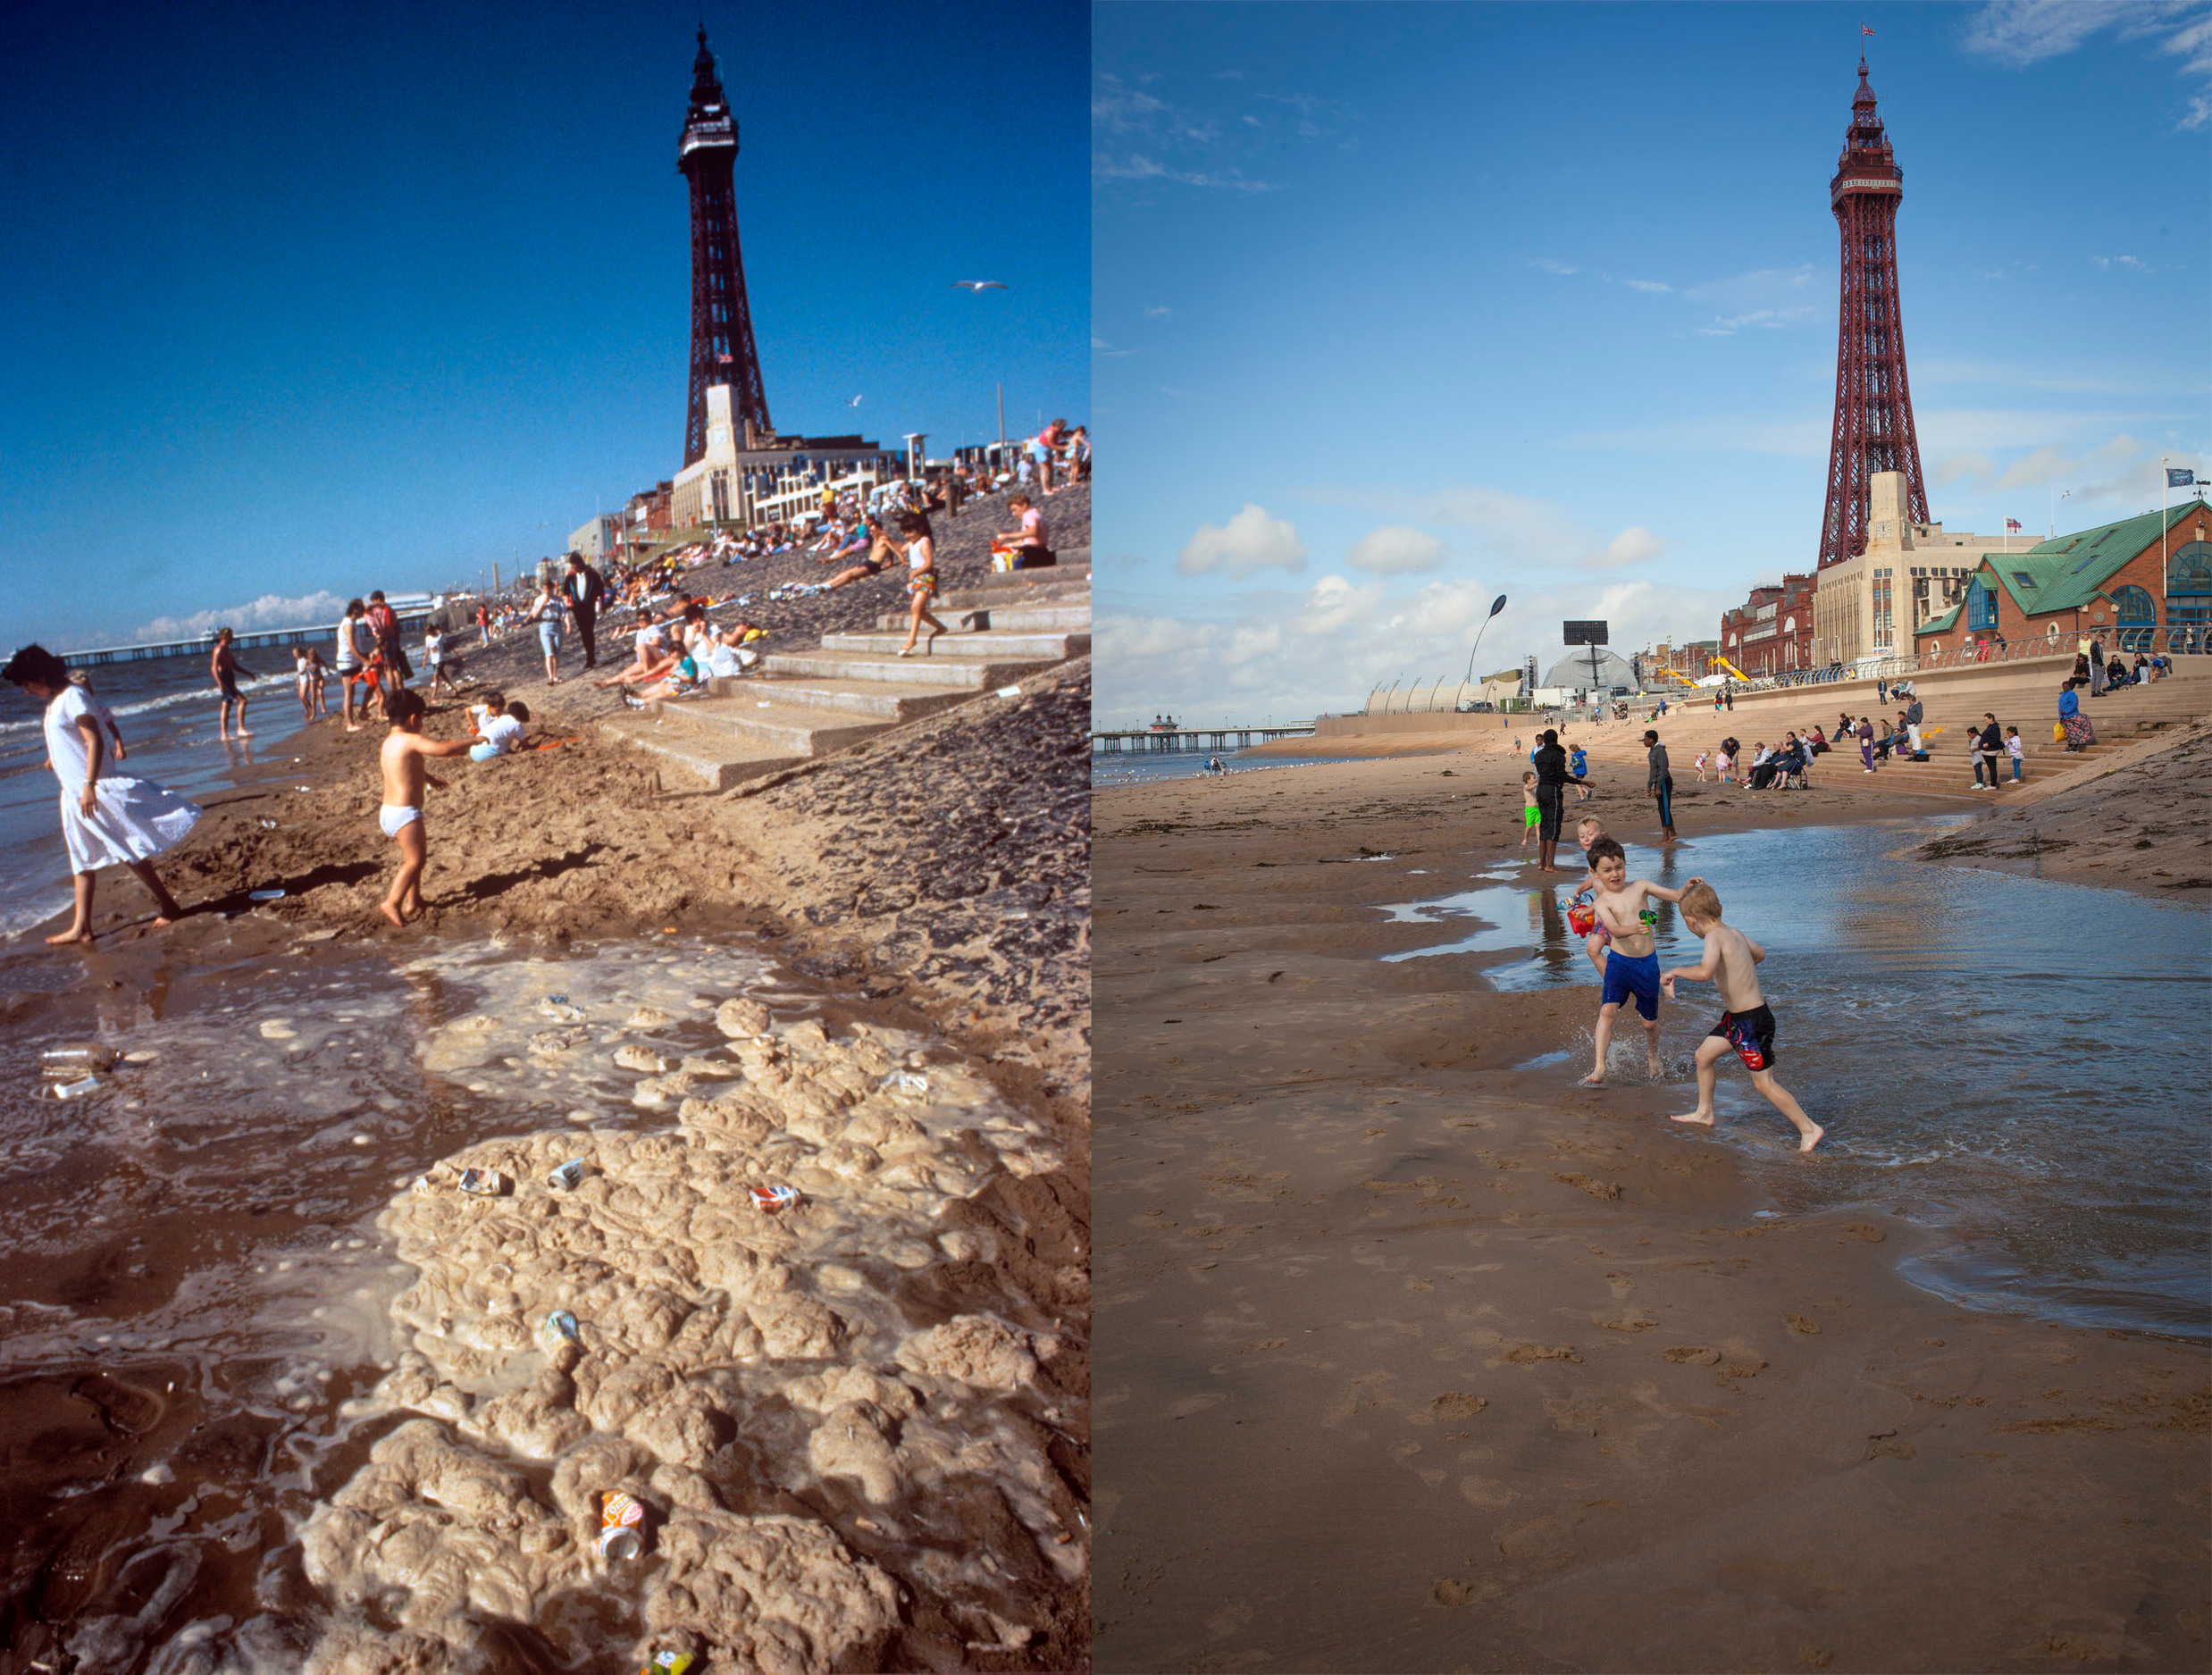 Before and after image. One side shows a busy beach, littered with waste by the water. The second photo shows the same beach but cleaned up. Two boys play in the clean water.